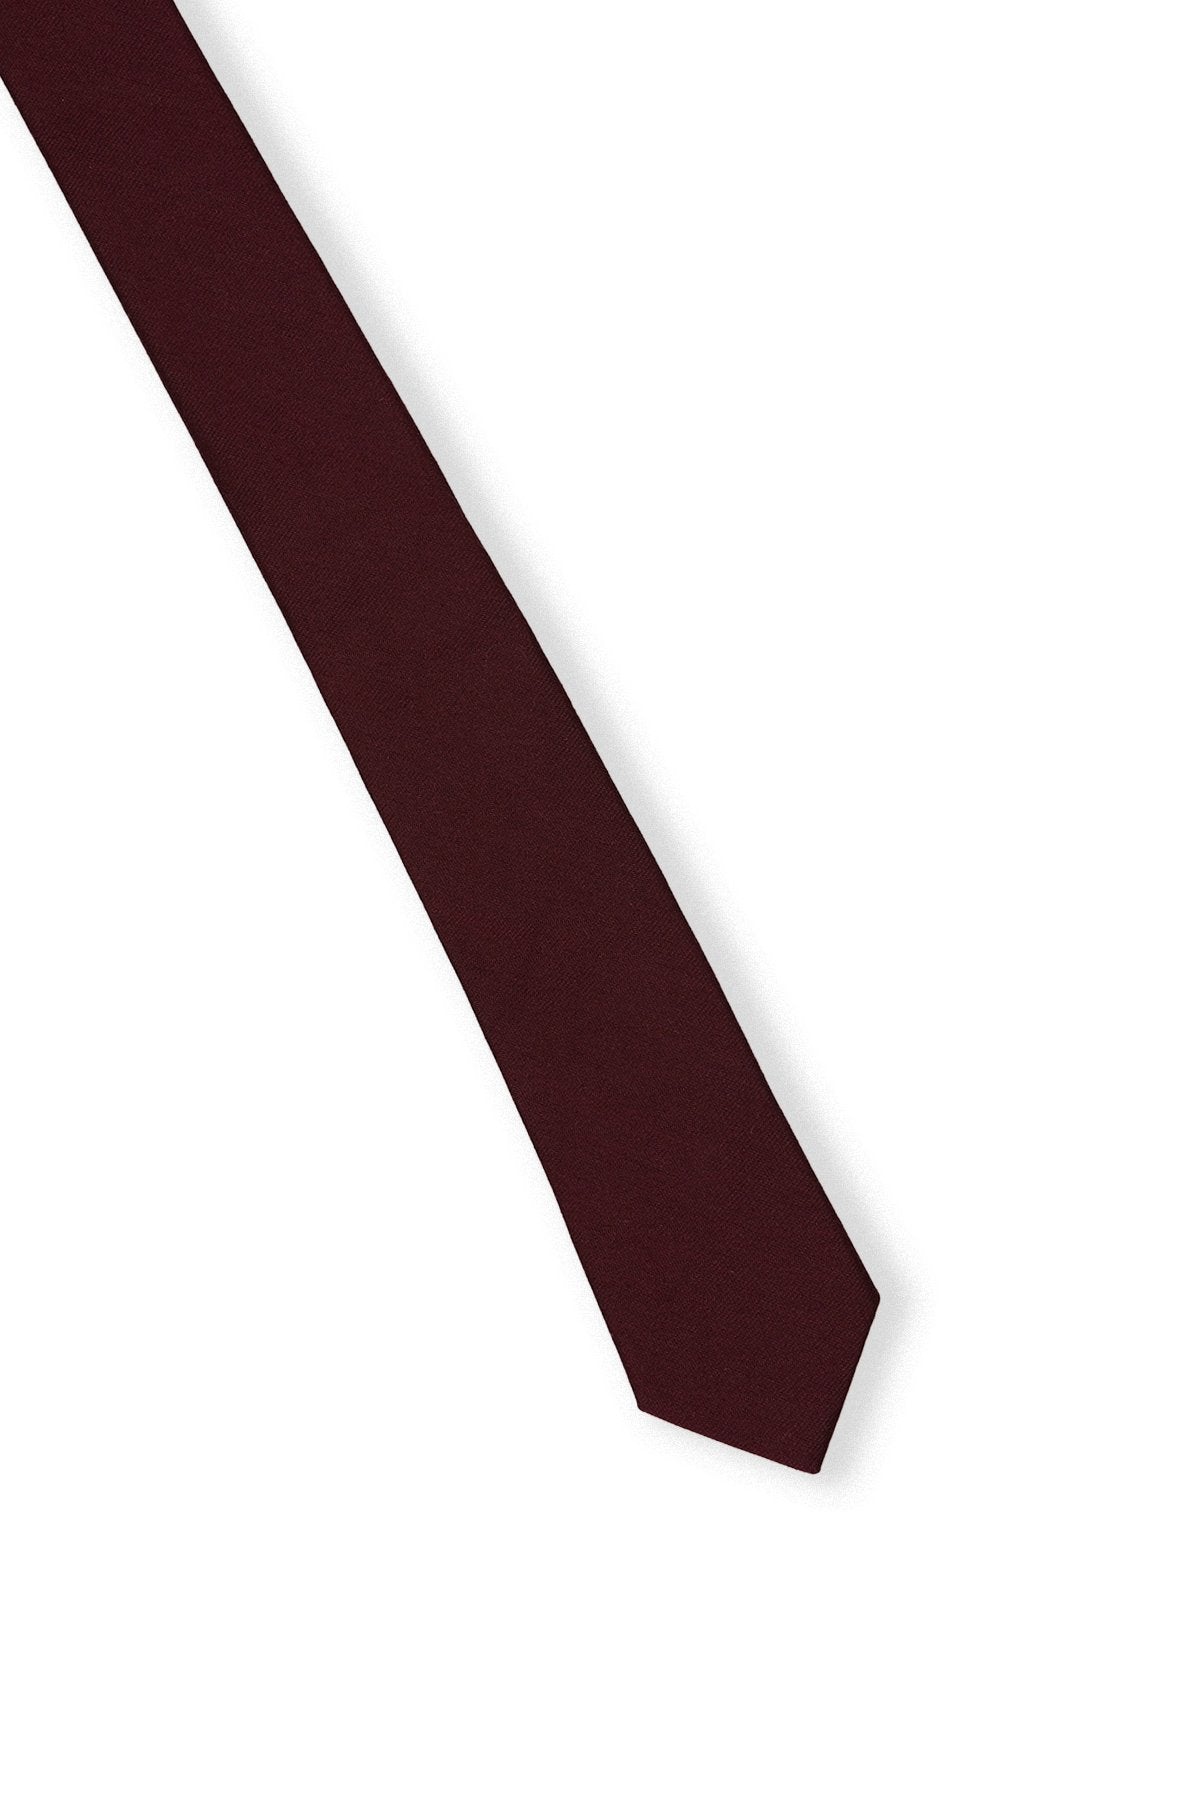 Elevated view of the Simon Necktie in cabernet fully extended on a white background showing the width of the necktie.